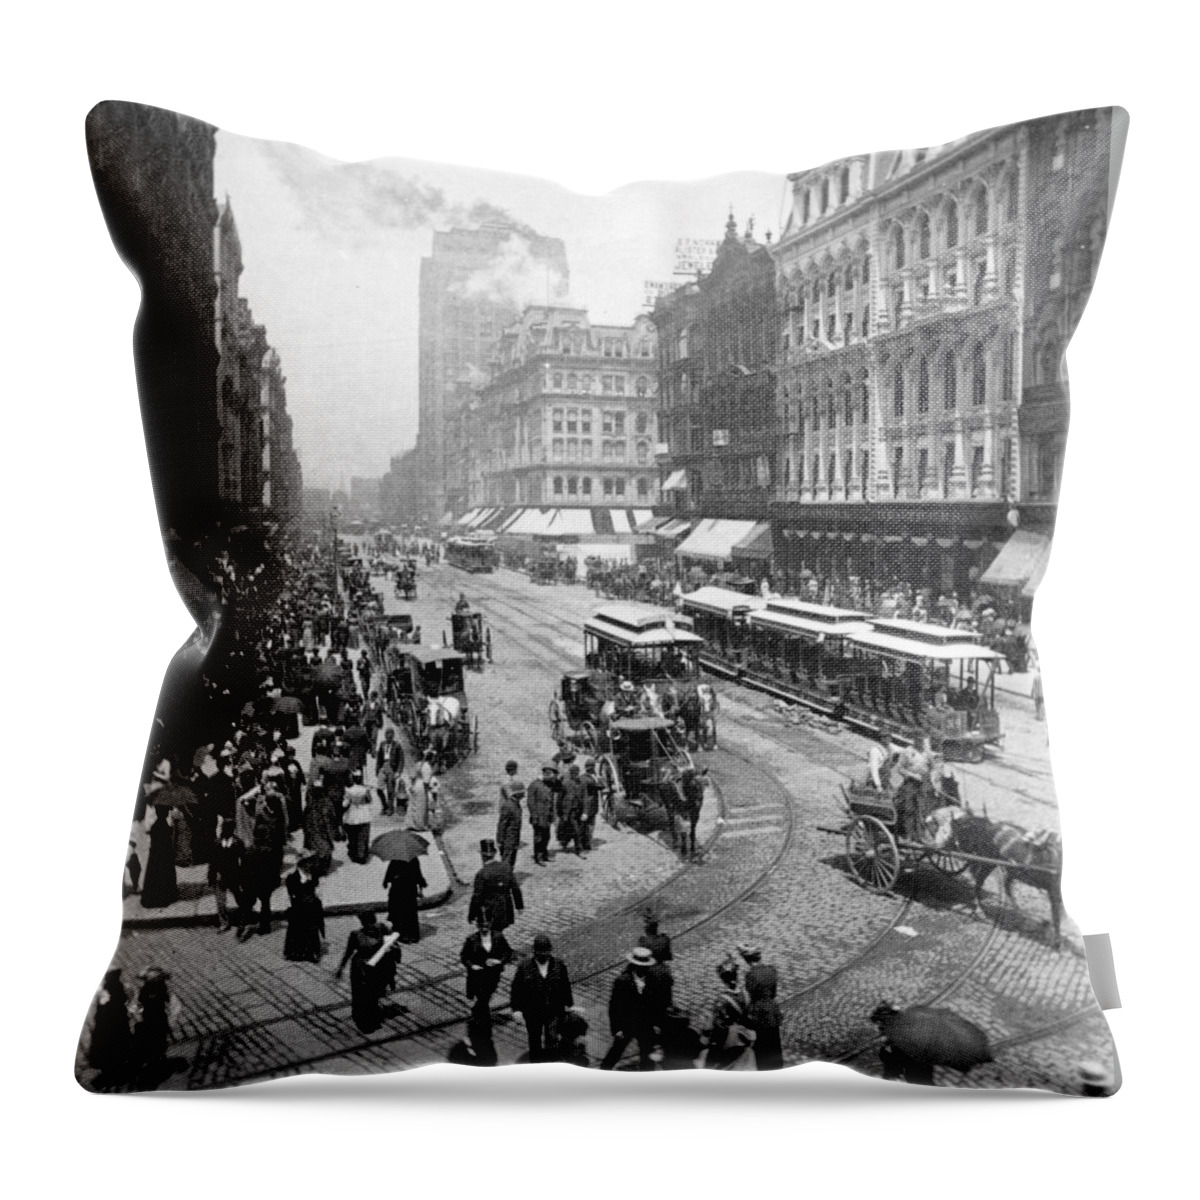 chicago Illinois Throw Pillow featuring the photograph State Street - Chicago Illinois - c 1893 by International Images